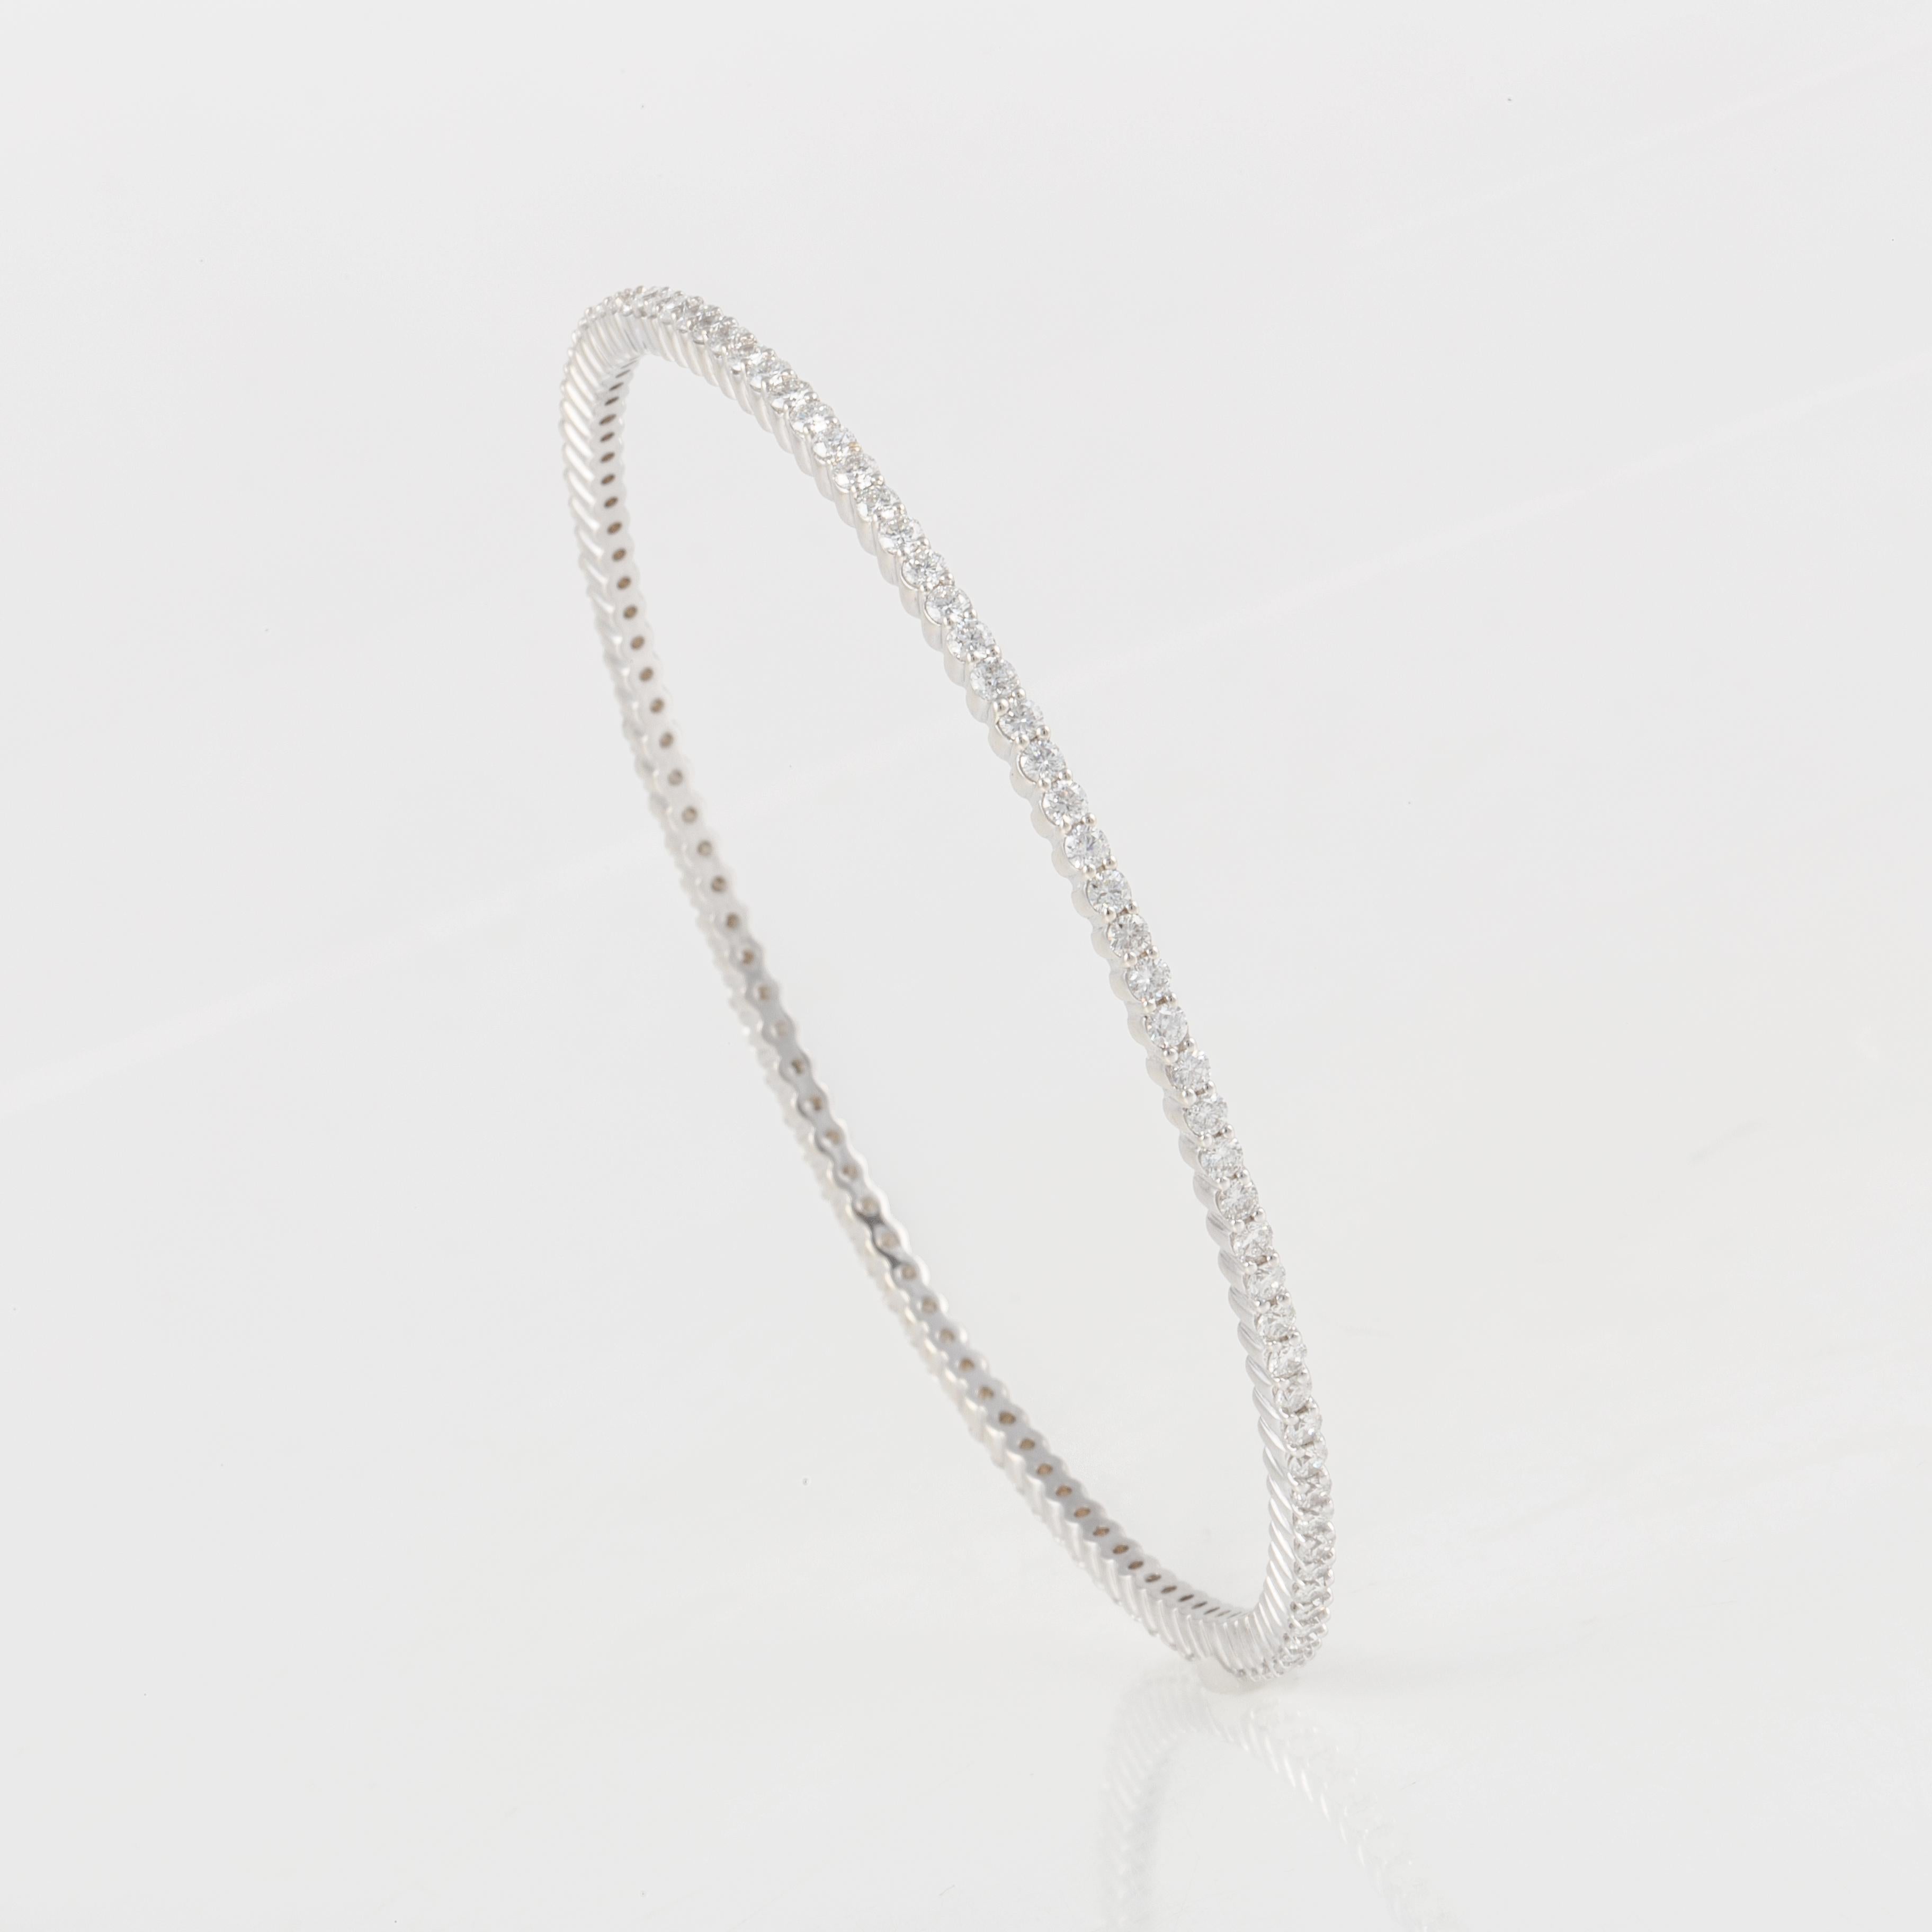 18K white gold slip on bangle bracelet with round diamonds going all the way around.  There are a total of 104 diamonds that total 3.15 carats, H-I color and SI clarity. The measurements from the inside are 2 1/2 inches in diameter, and the bangle